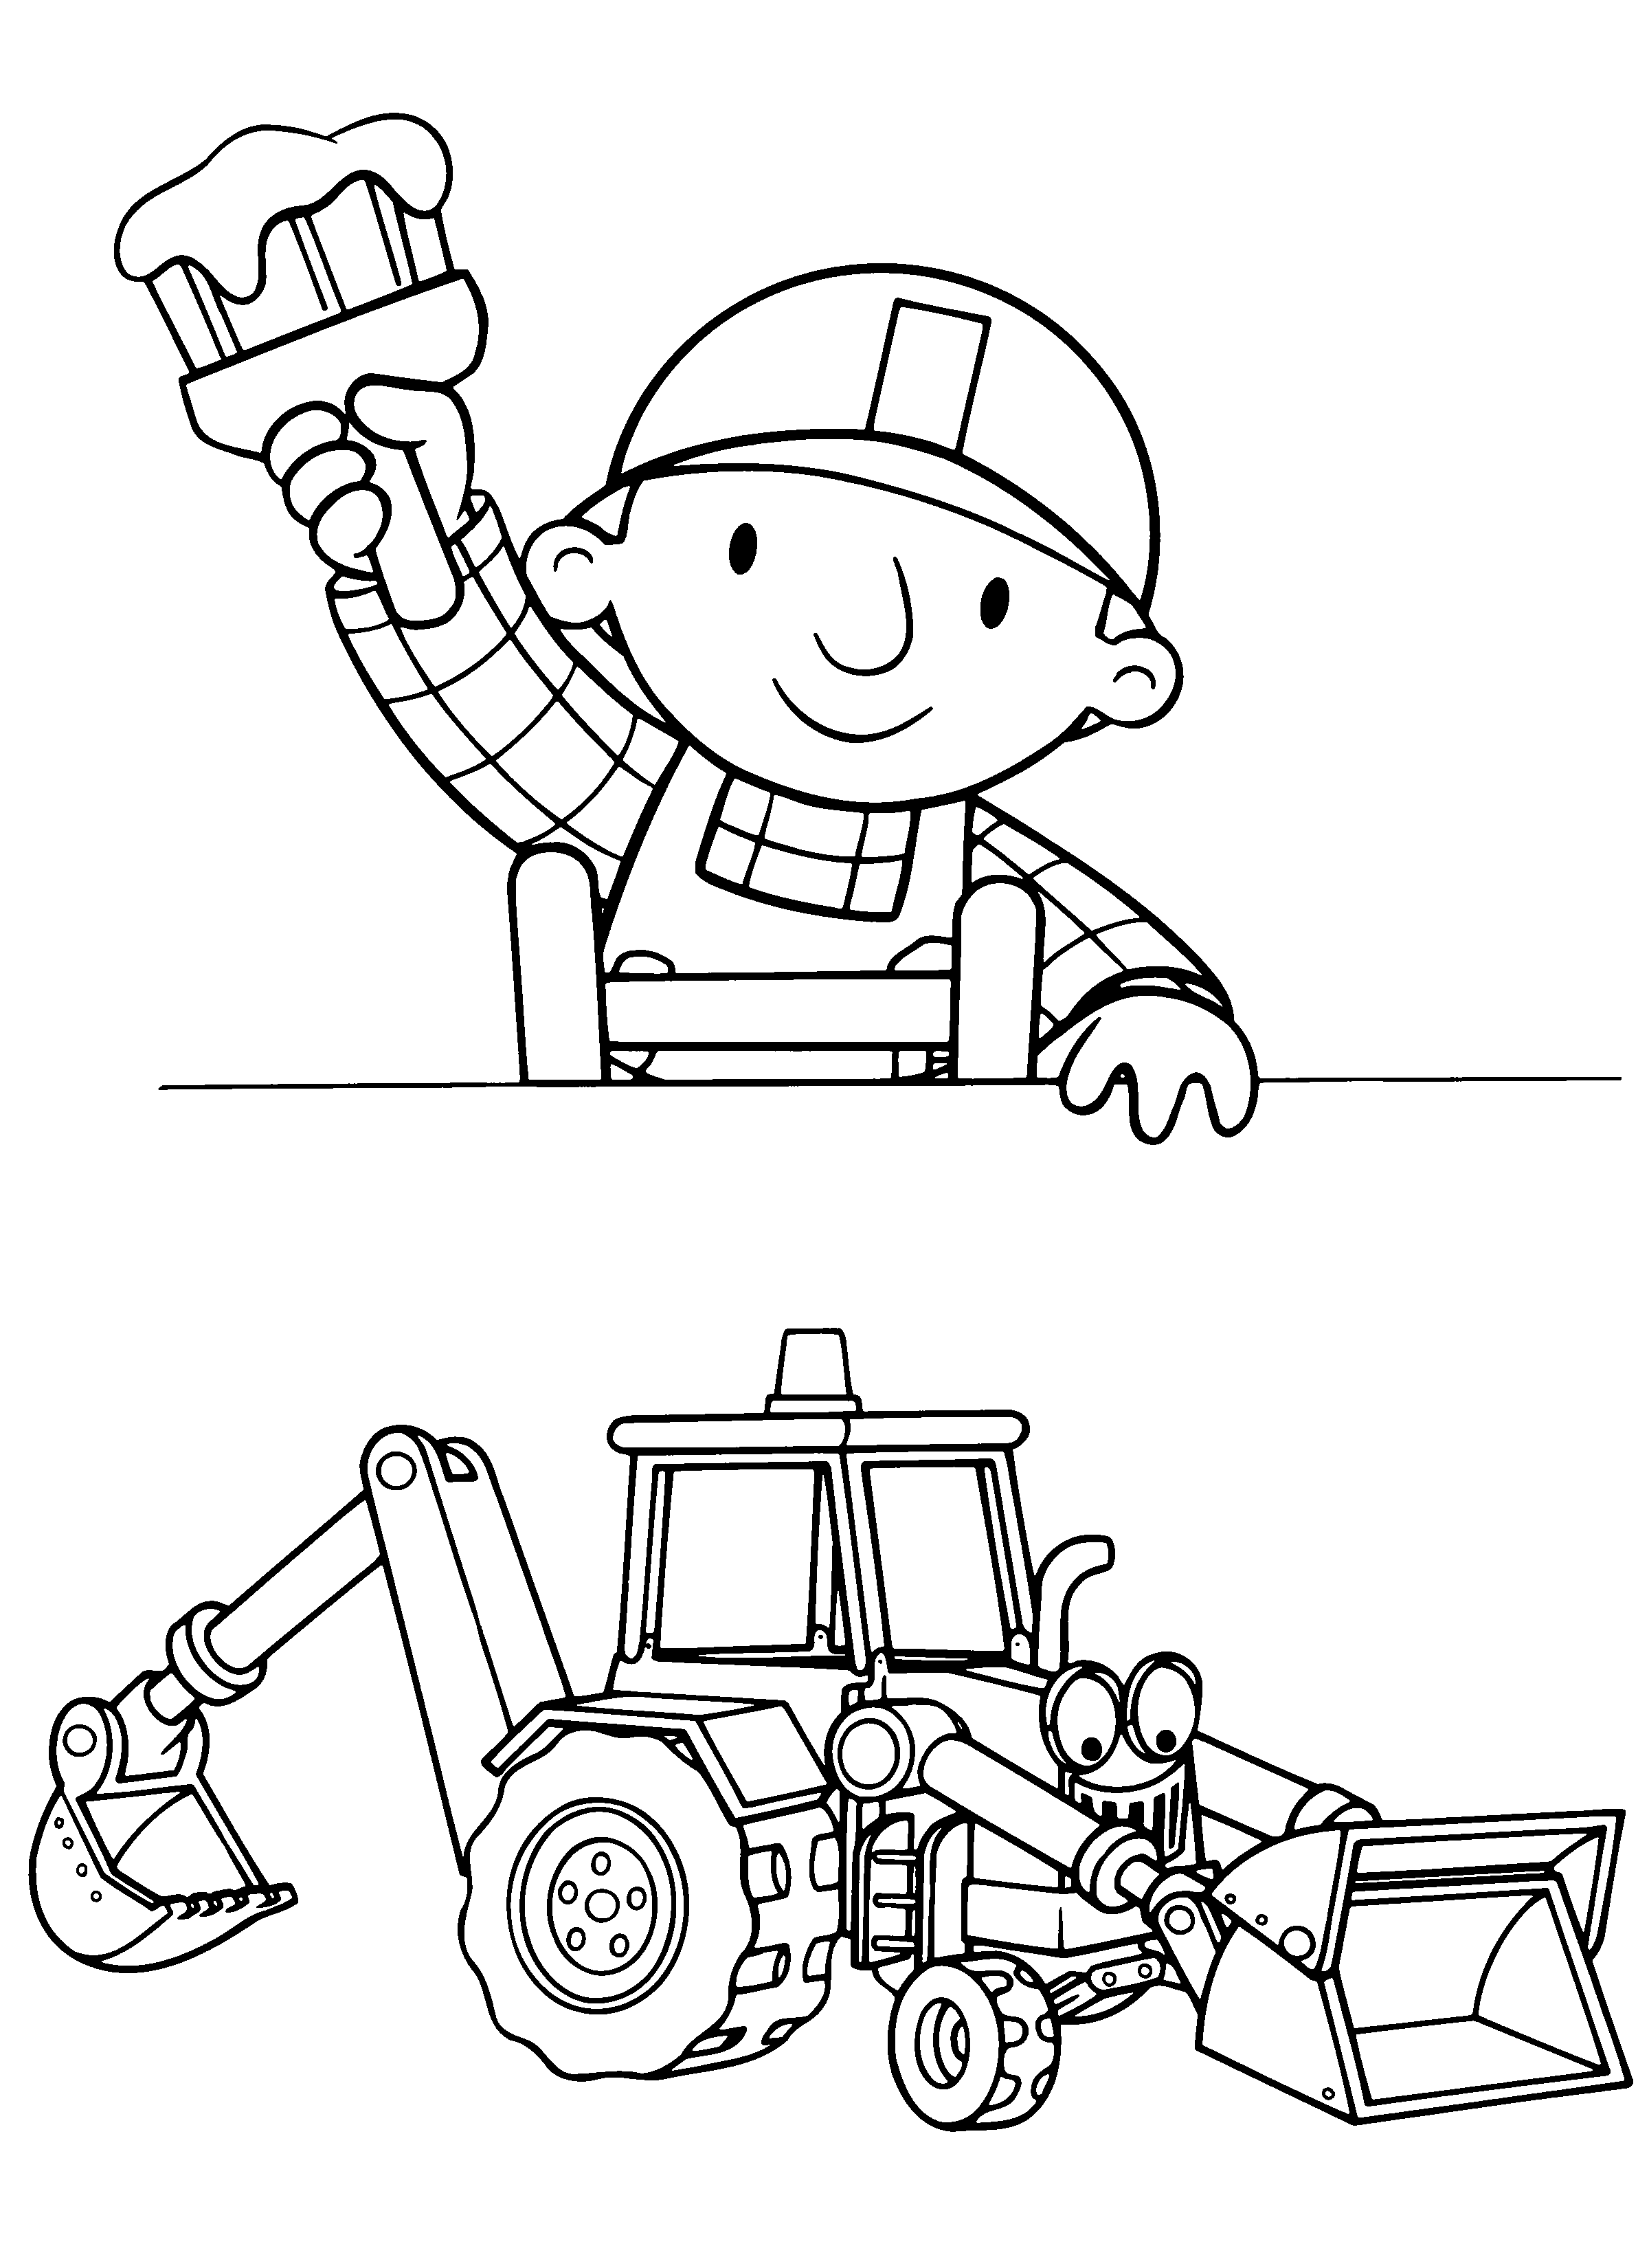 coloring pages of bob the builder